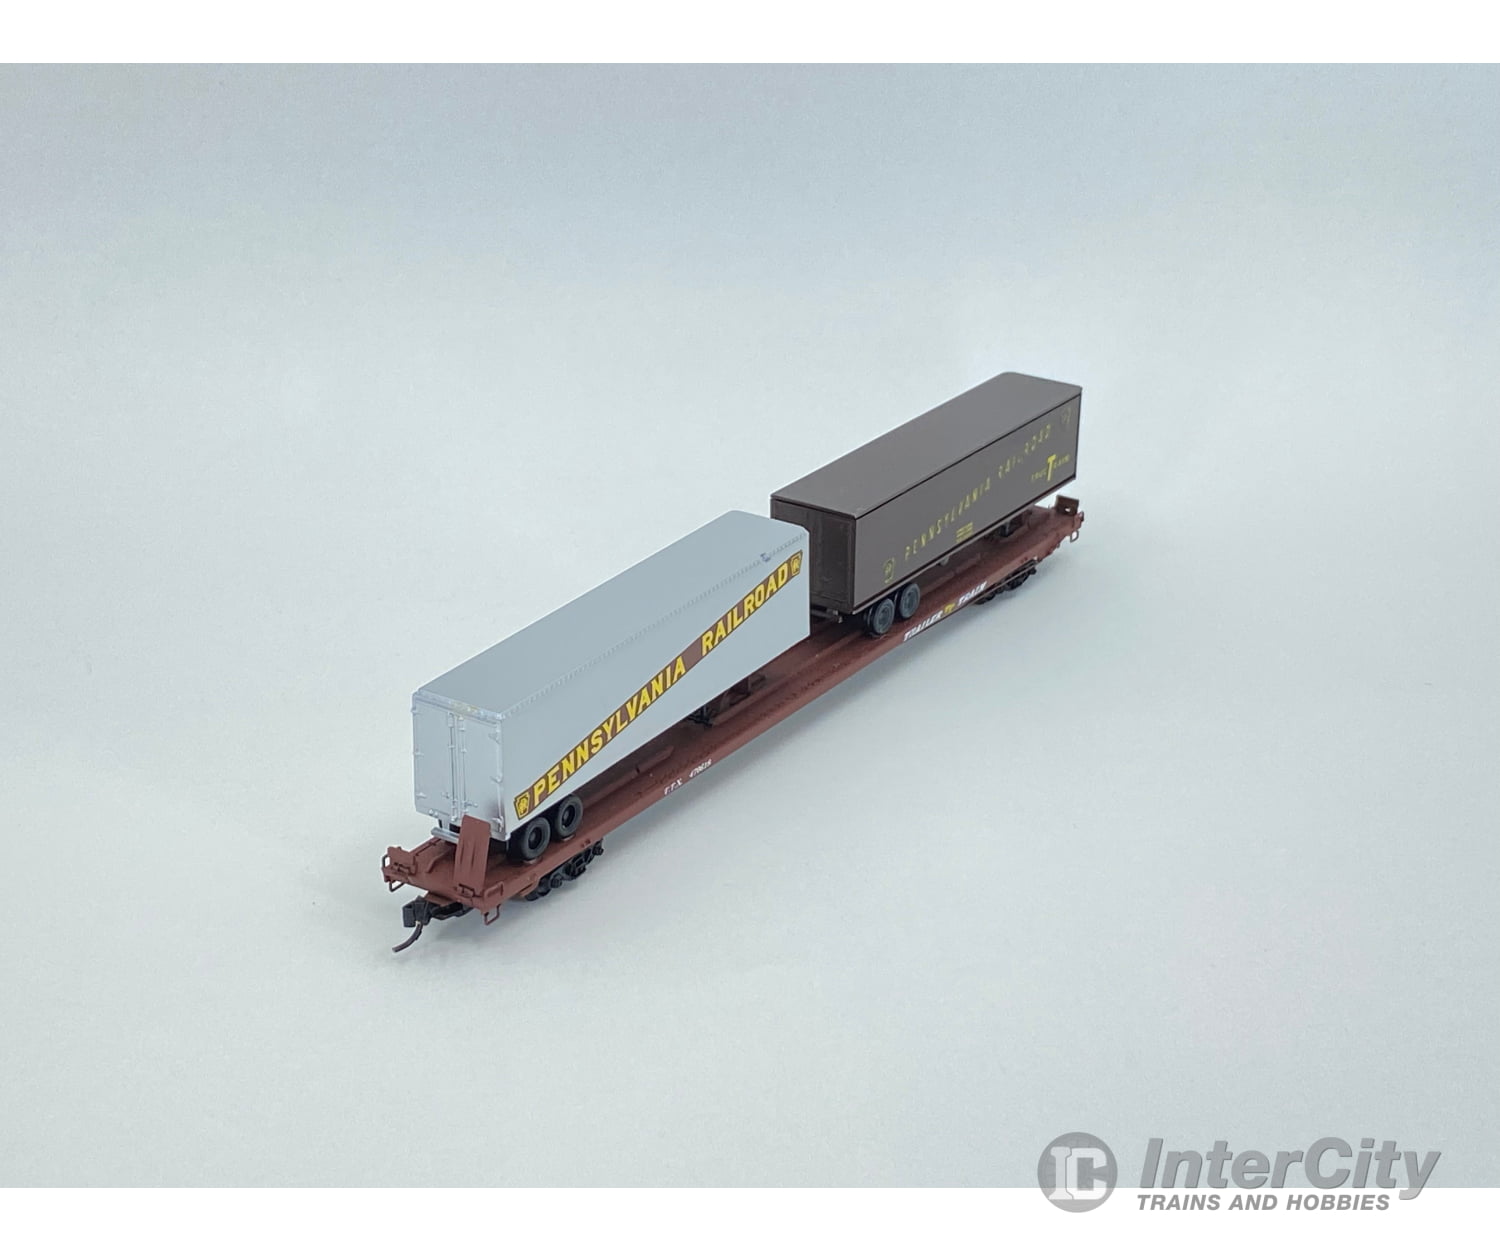 Micro Trains 71040 N 89 4 Tofc Flat Car Missouri Pacific (Mp) 470618 Freight Loads & Containers